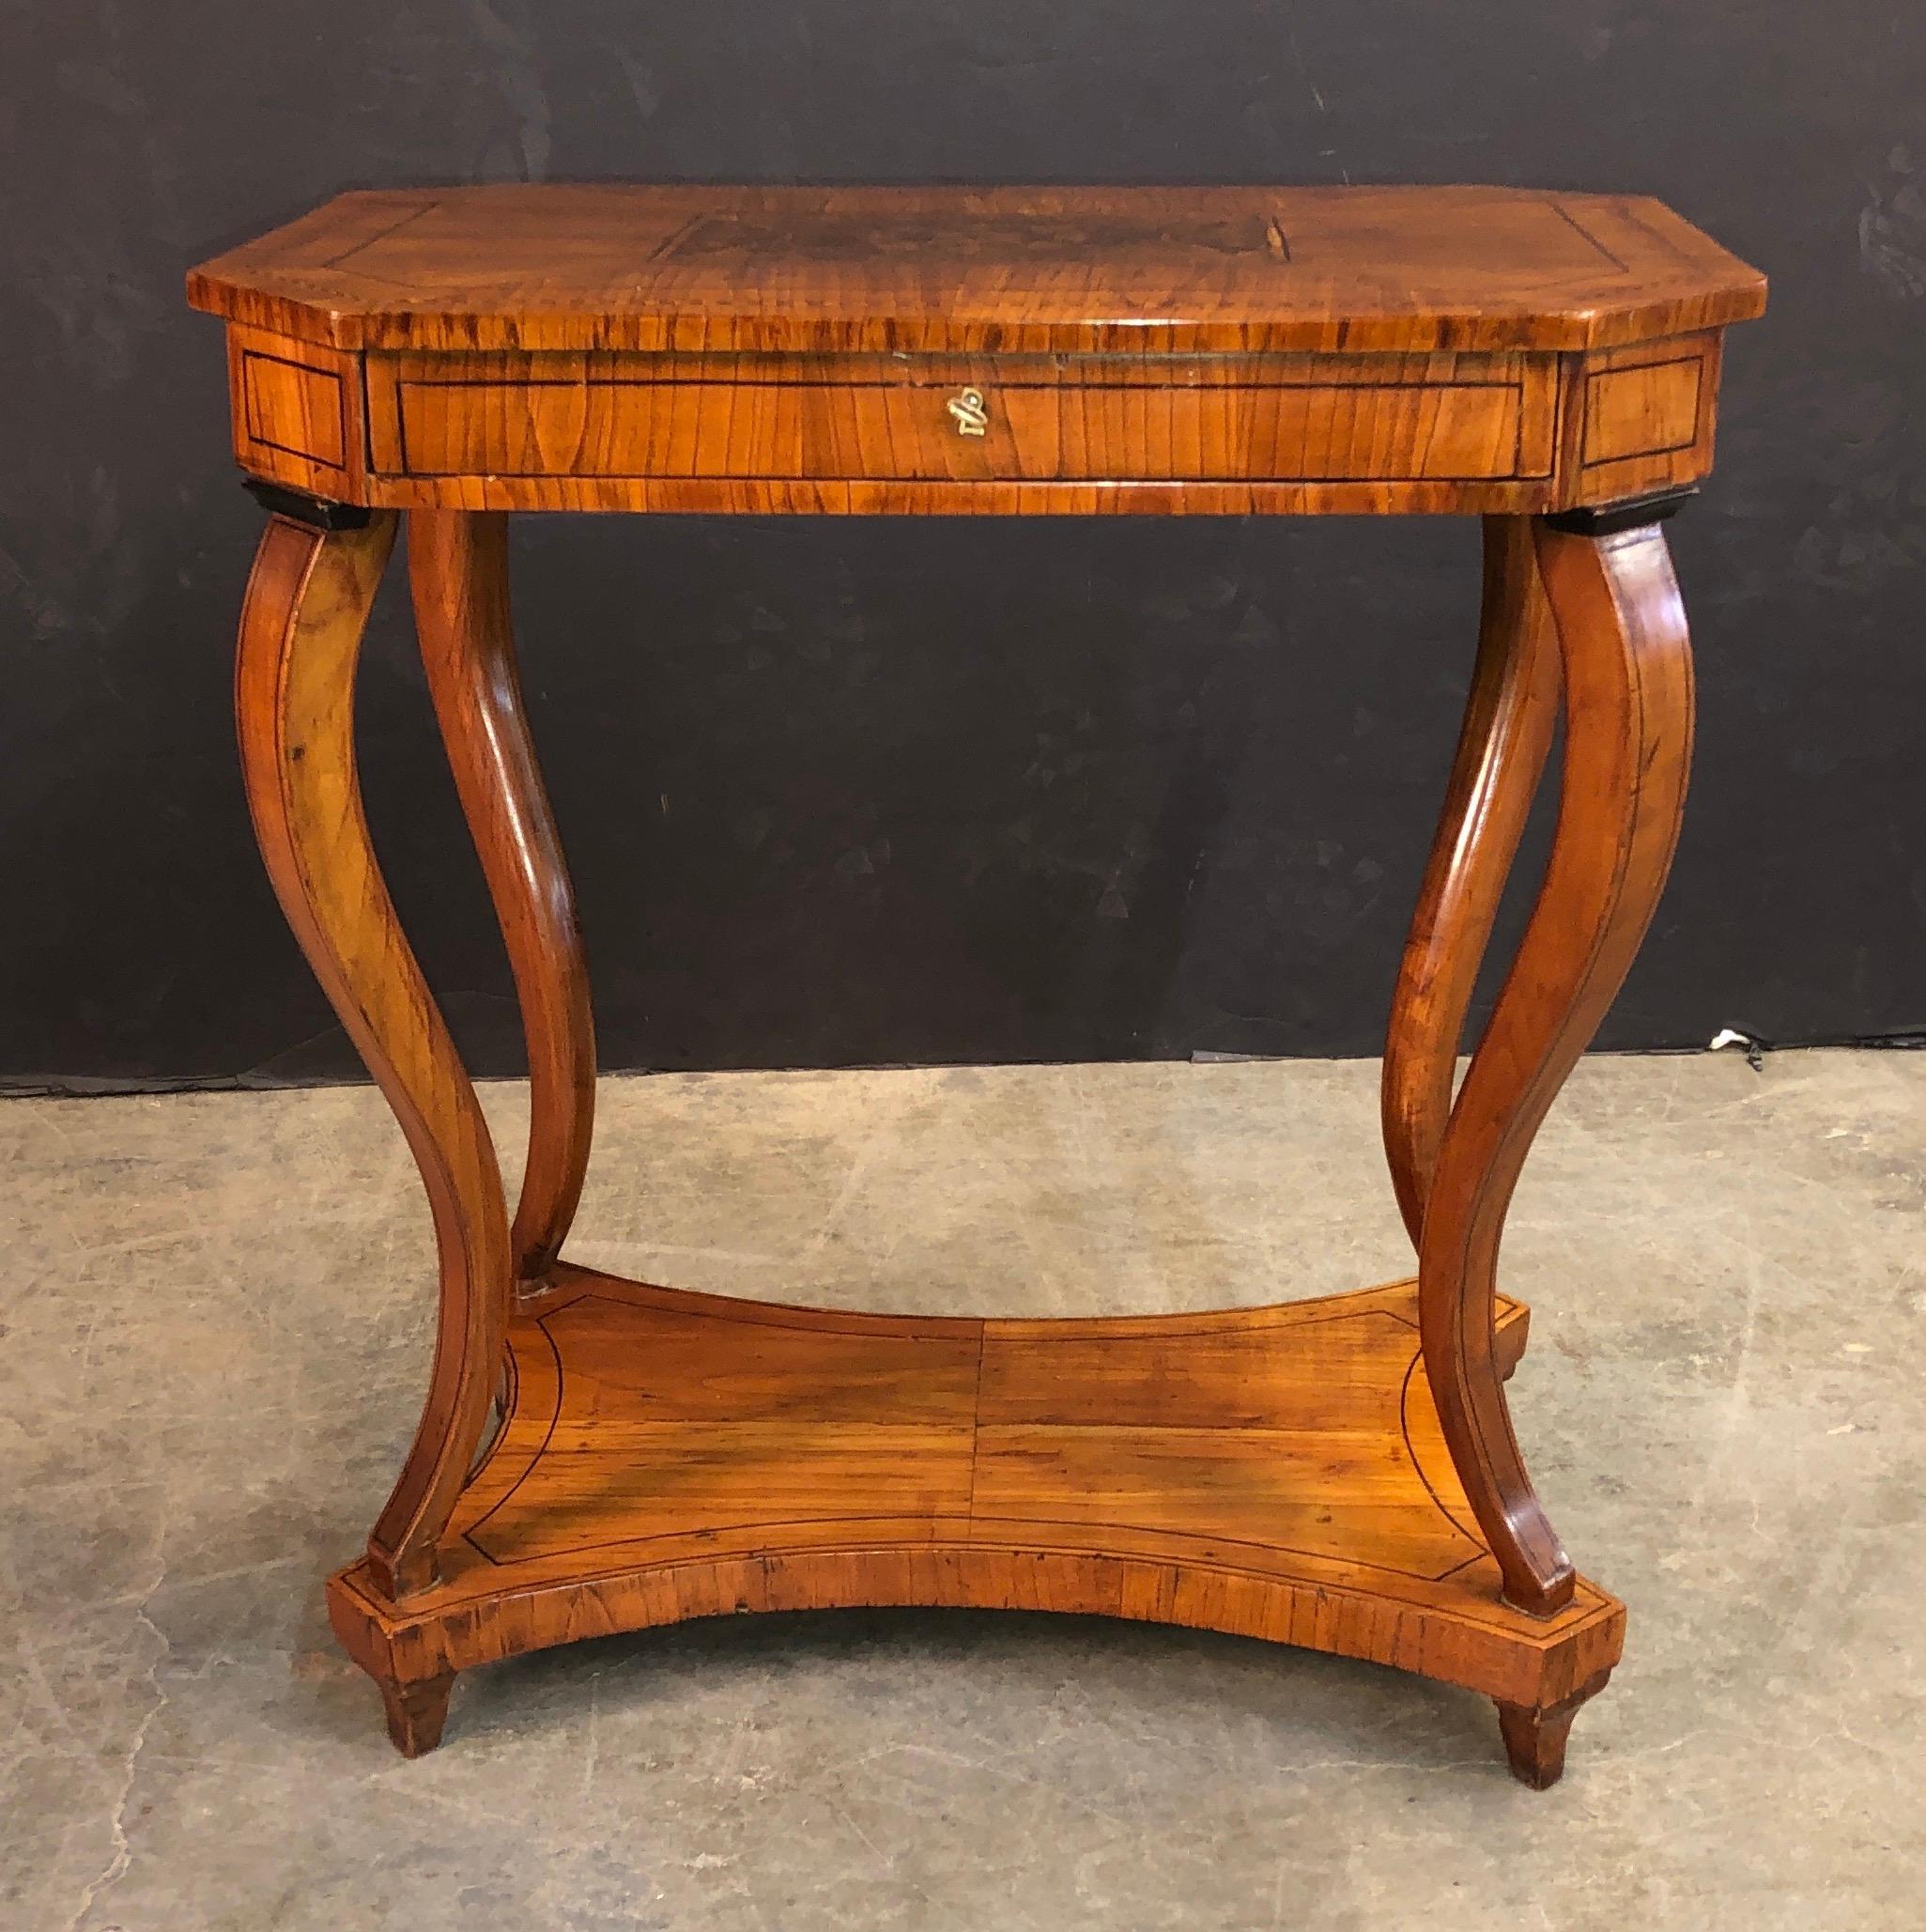 An unusual French Charles X walnut and fine marquetry inlaid one drawer side table with a shelf stretcher base,